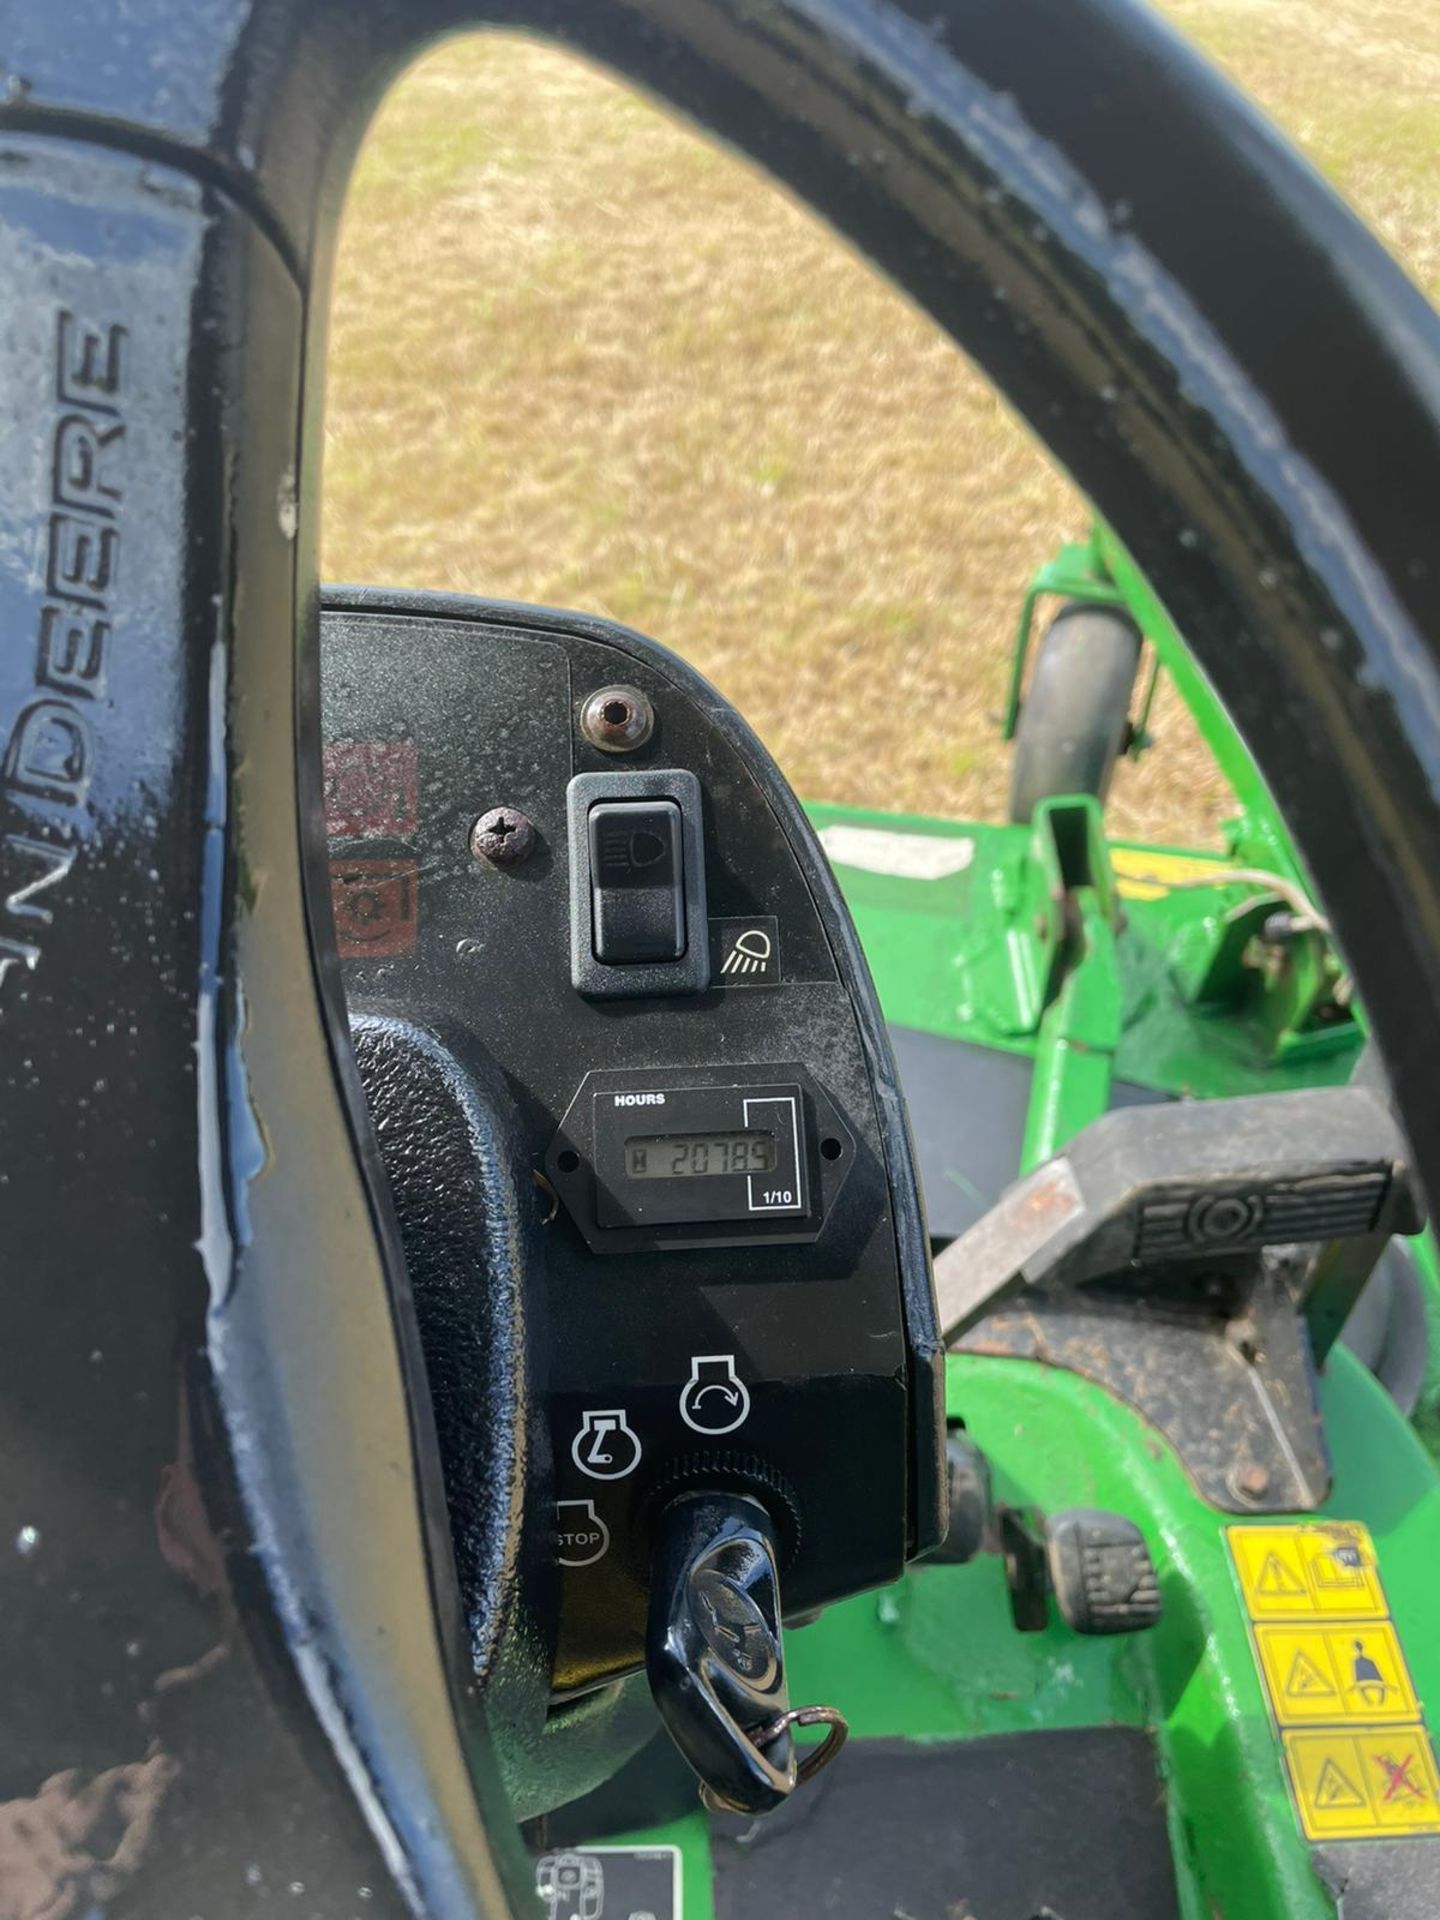 JOHN DEERE 1565 SERIES 2 RIDE ON LAWN MOWER WITH CLAMSHELL COLLECTOR *NO VAT* - Image 12 of 12